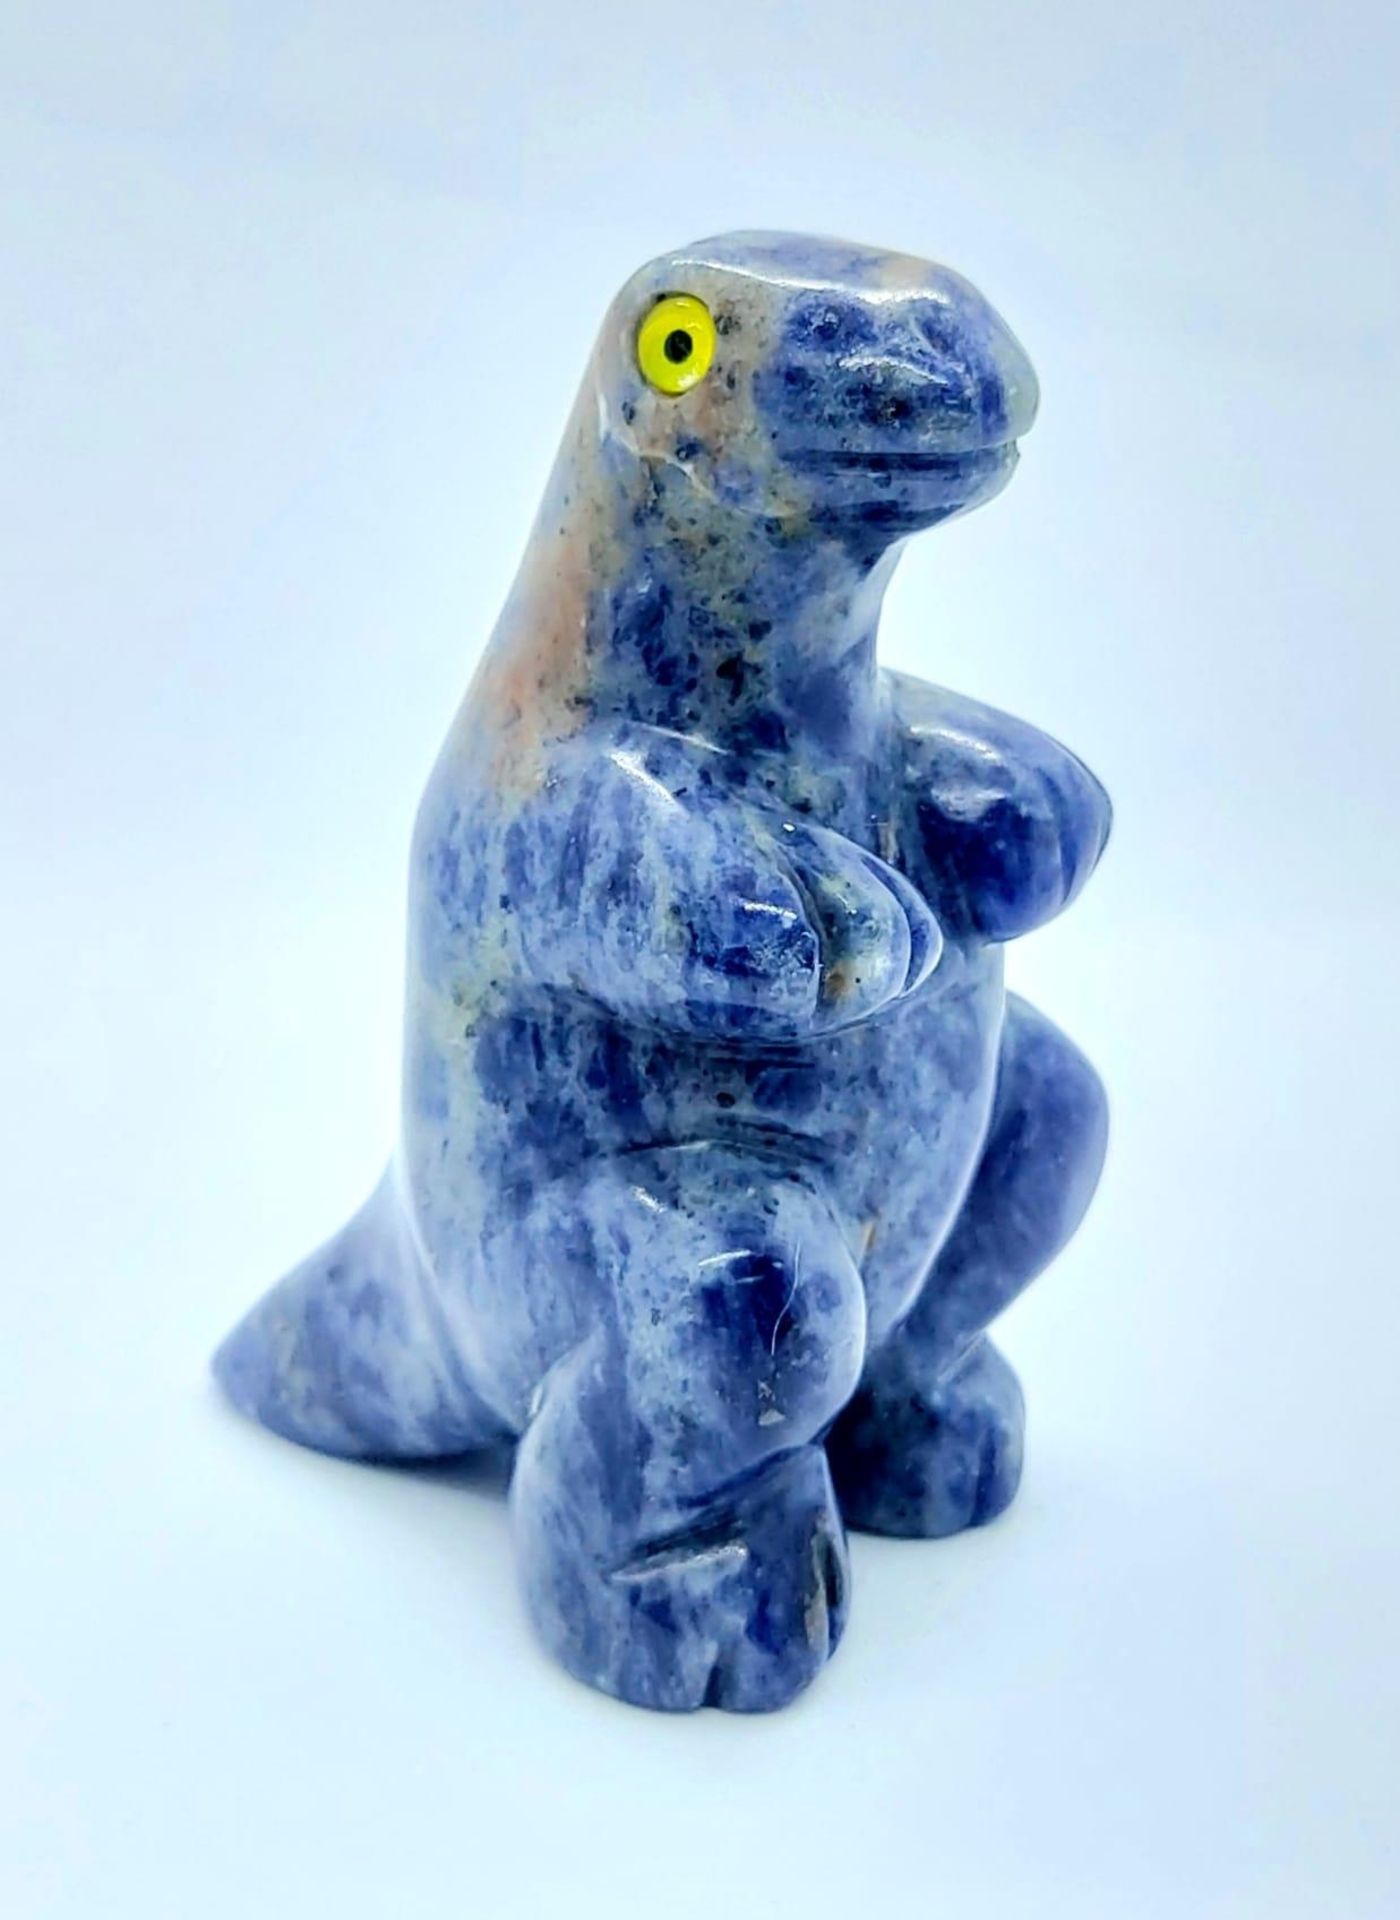 A CUTE DINOSAUR FIGURE MADE IN LAPIS WITH GEMSTONE EYES . 87gms 6cms tall